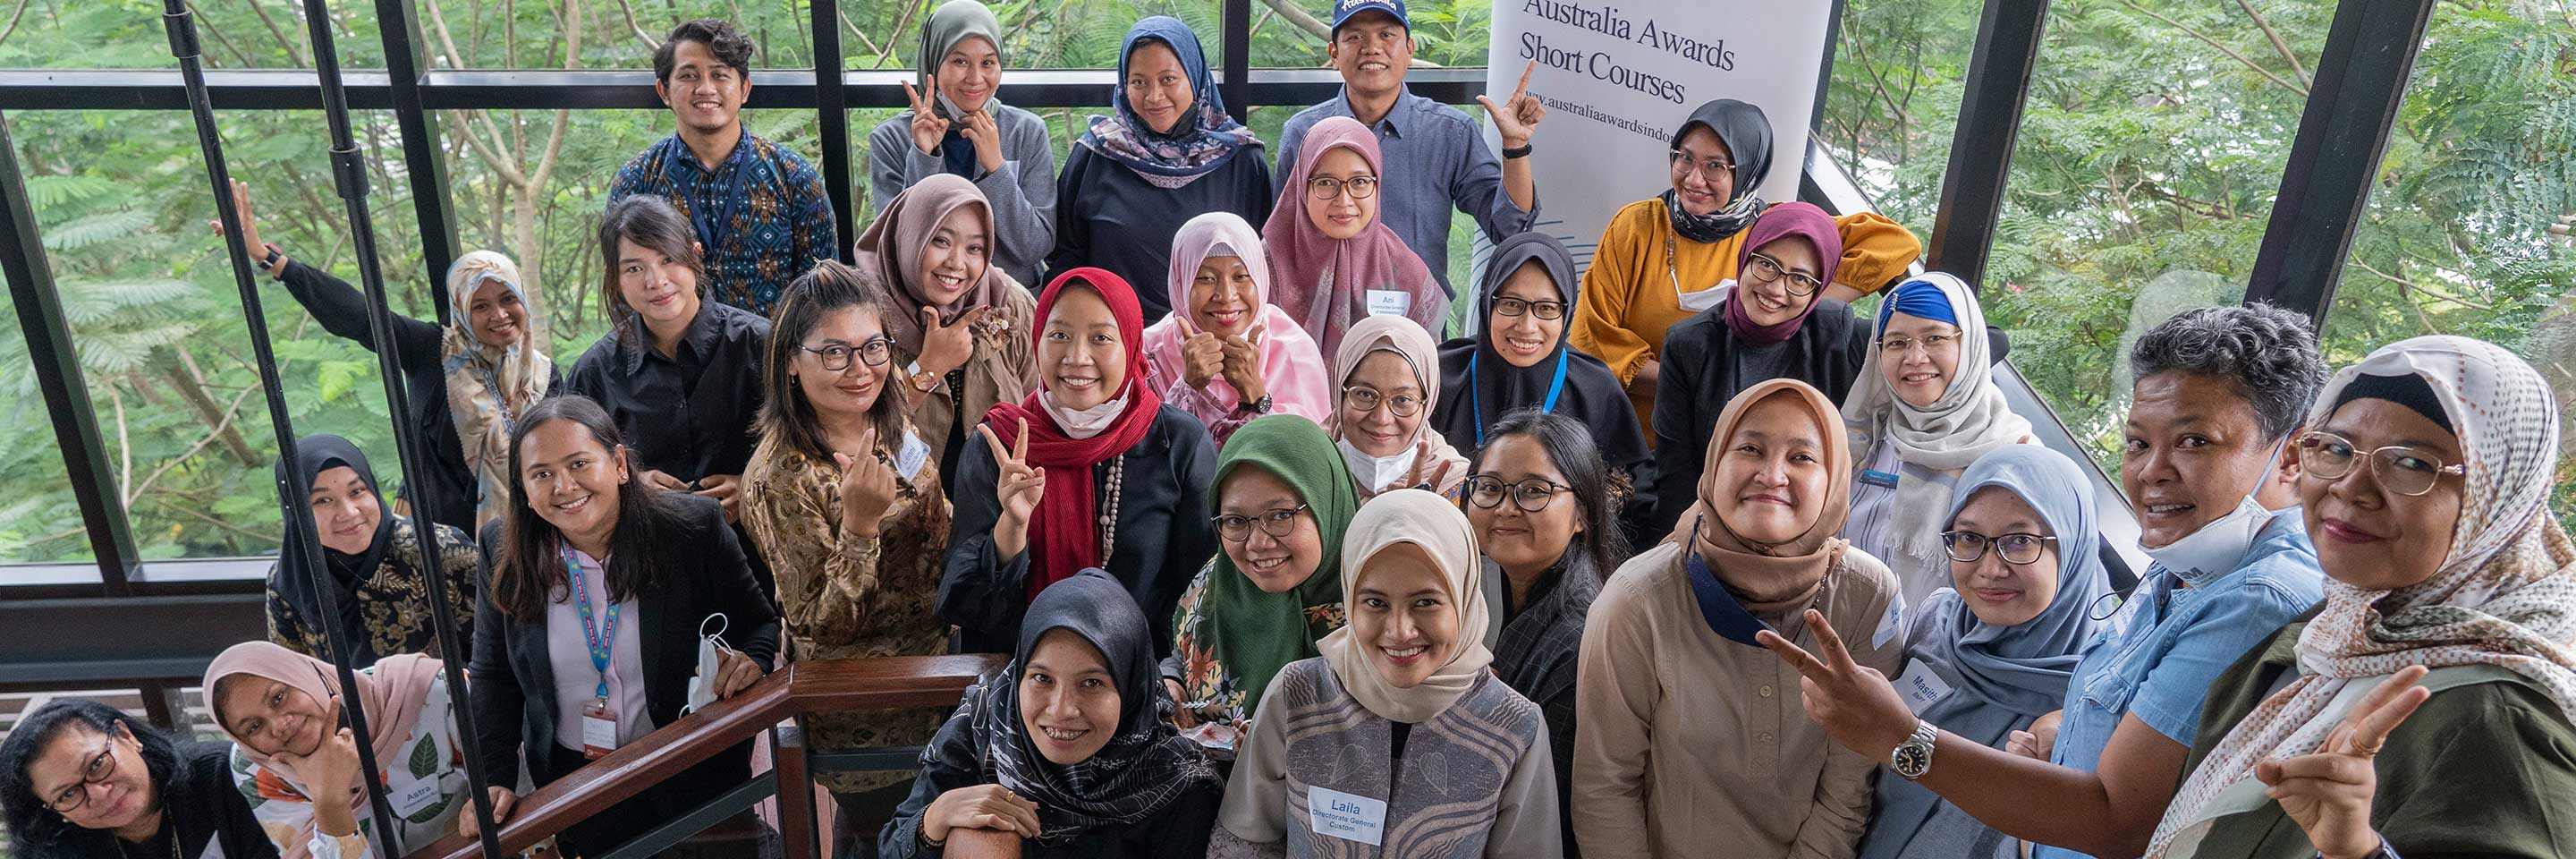 Representatives from the Indonesian government's security agencies, including the National Armed Forces and Police, attend a short course on Women in Leadership in the Security Sector